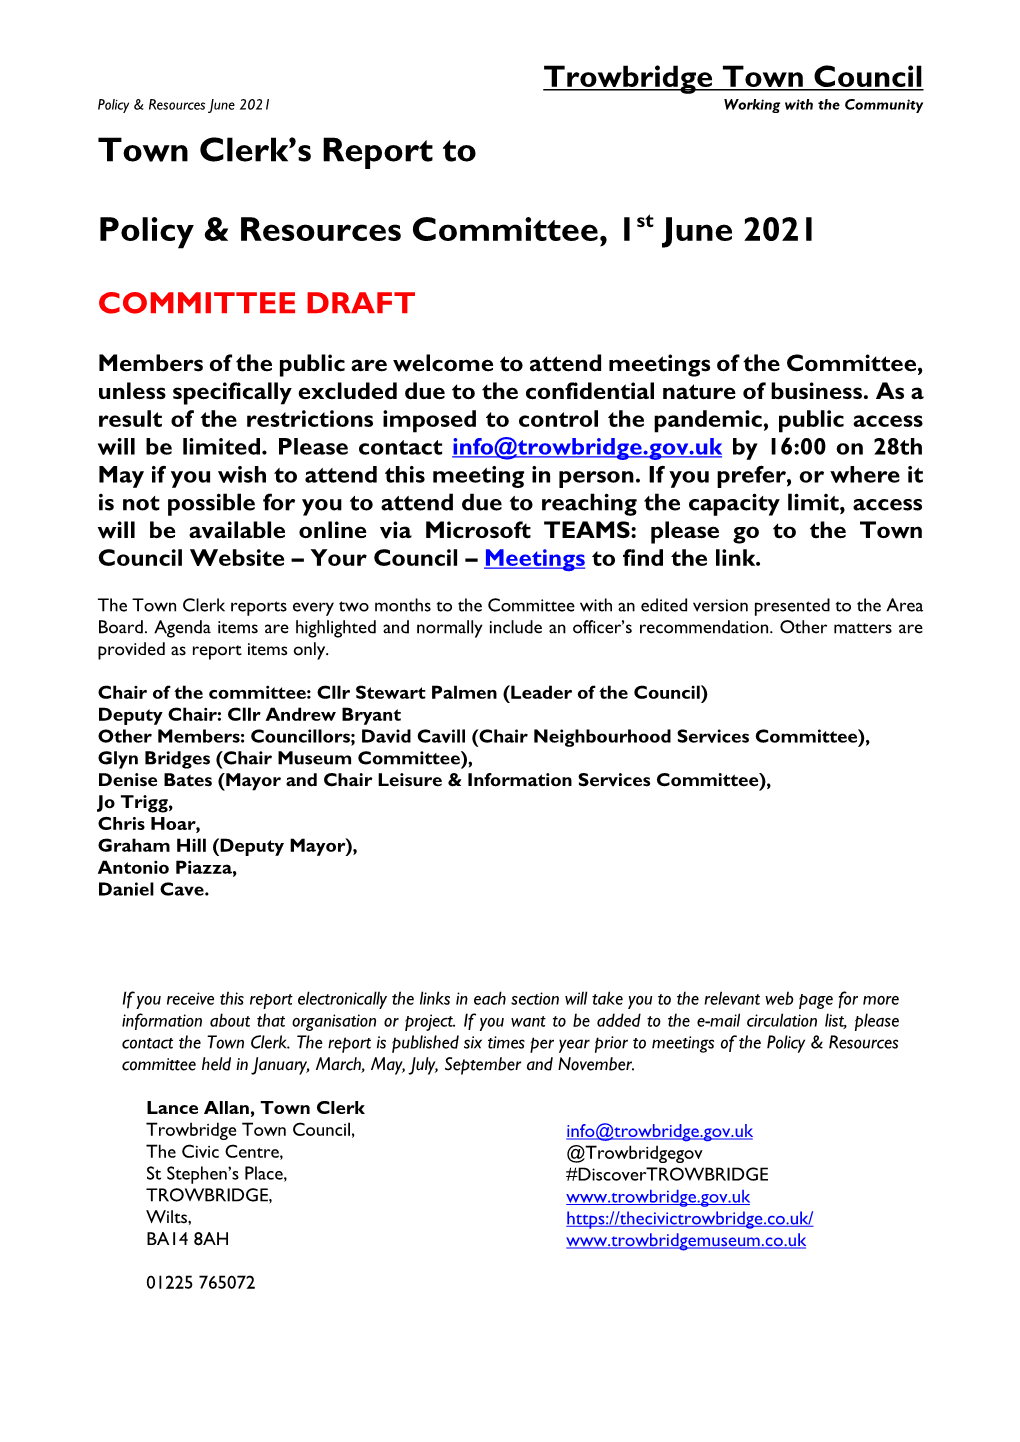 Town Clerk's Report to Policy & Resources Committee, 1St June 2021